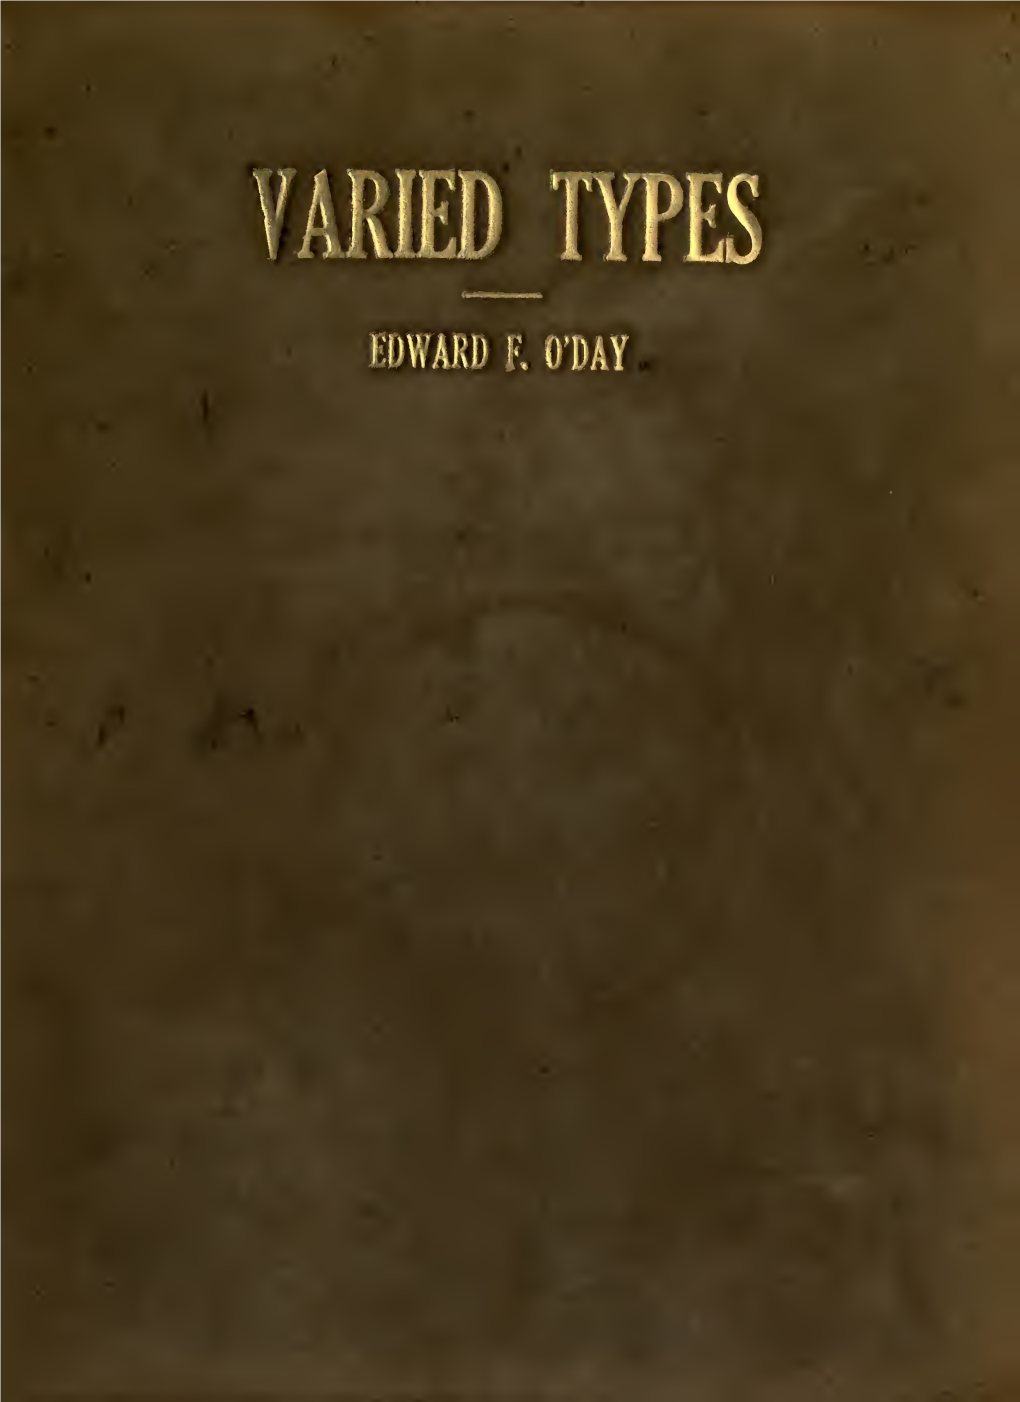 VARIED TYPES This Edition, Printed by the Town Talk Press, Is Limited to Seventy-Five Copies, Signed by the Author, of Which This Is VARIED TYPES BY